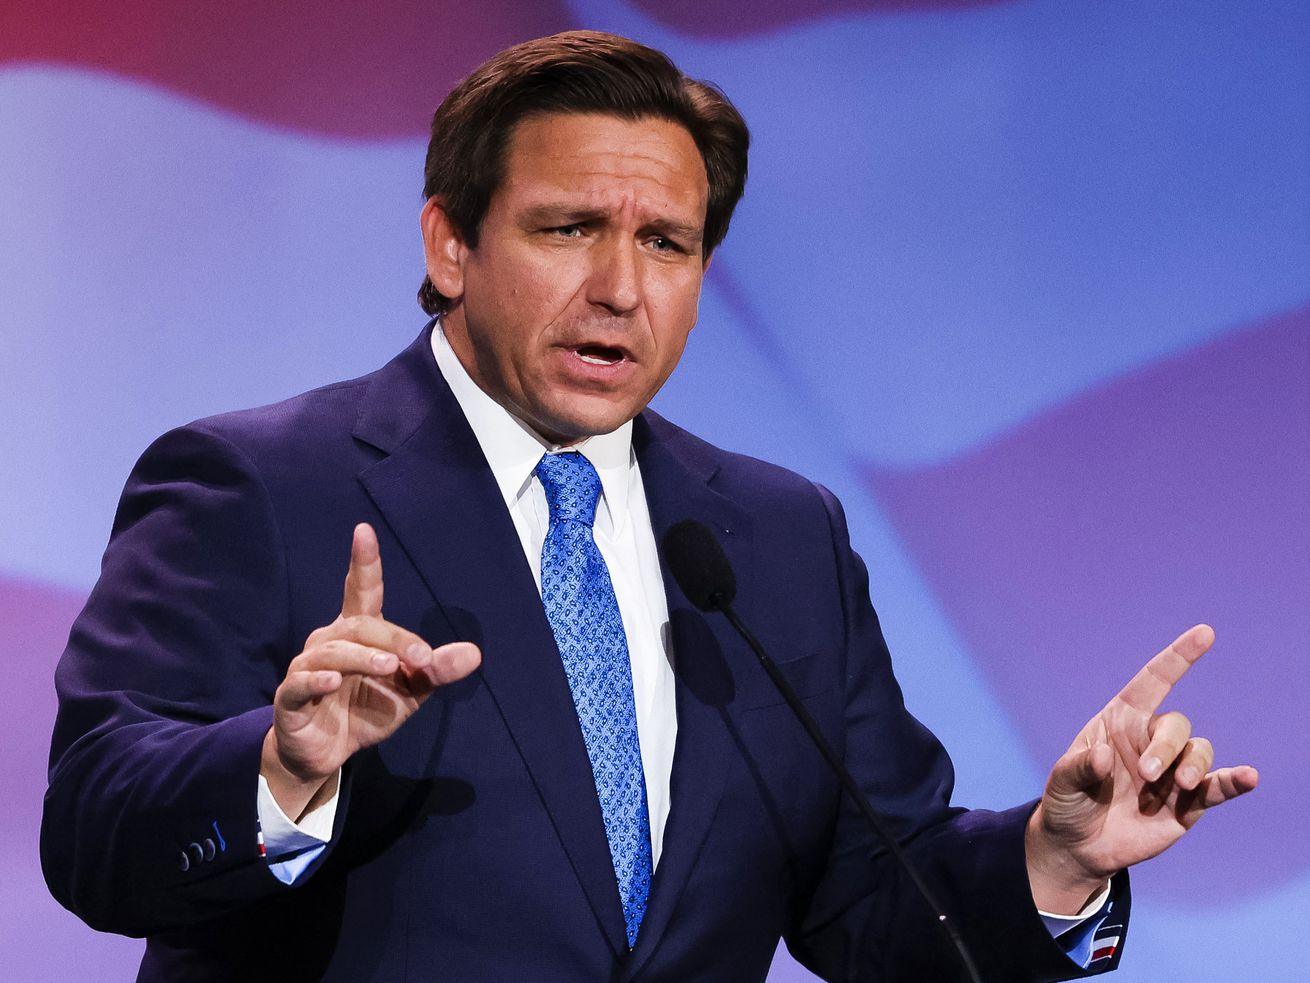 Ron DeSantis’s vaccine “investigation” is all about beating Trump